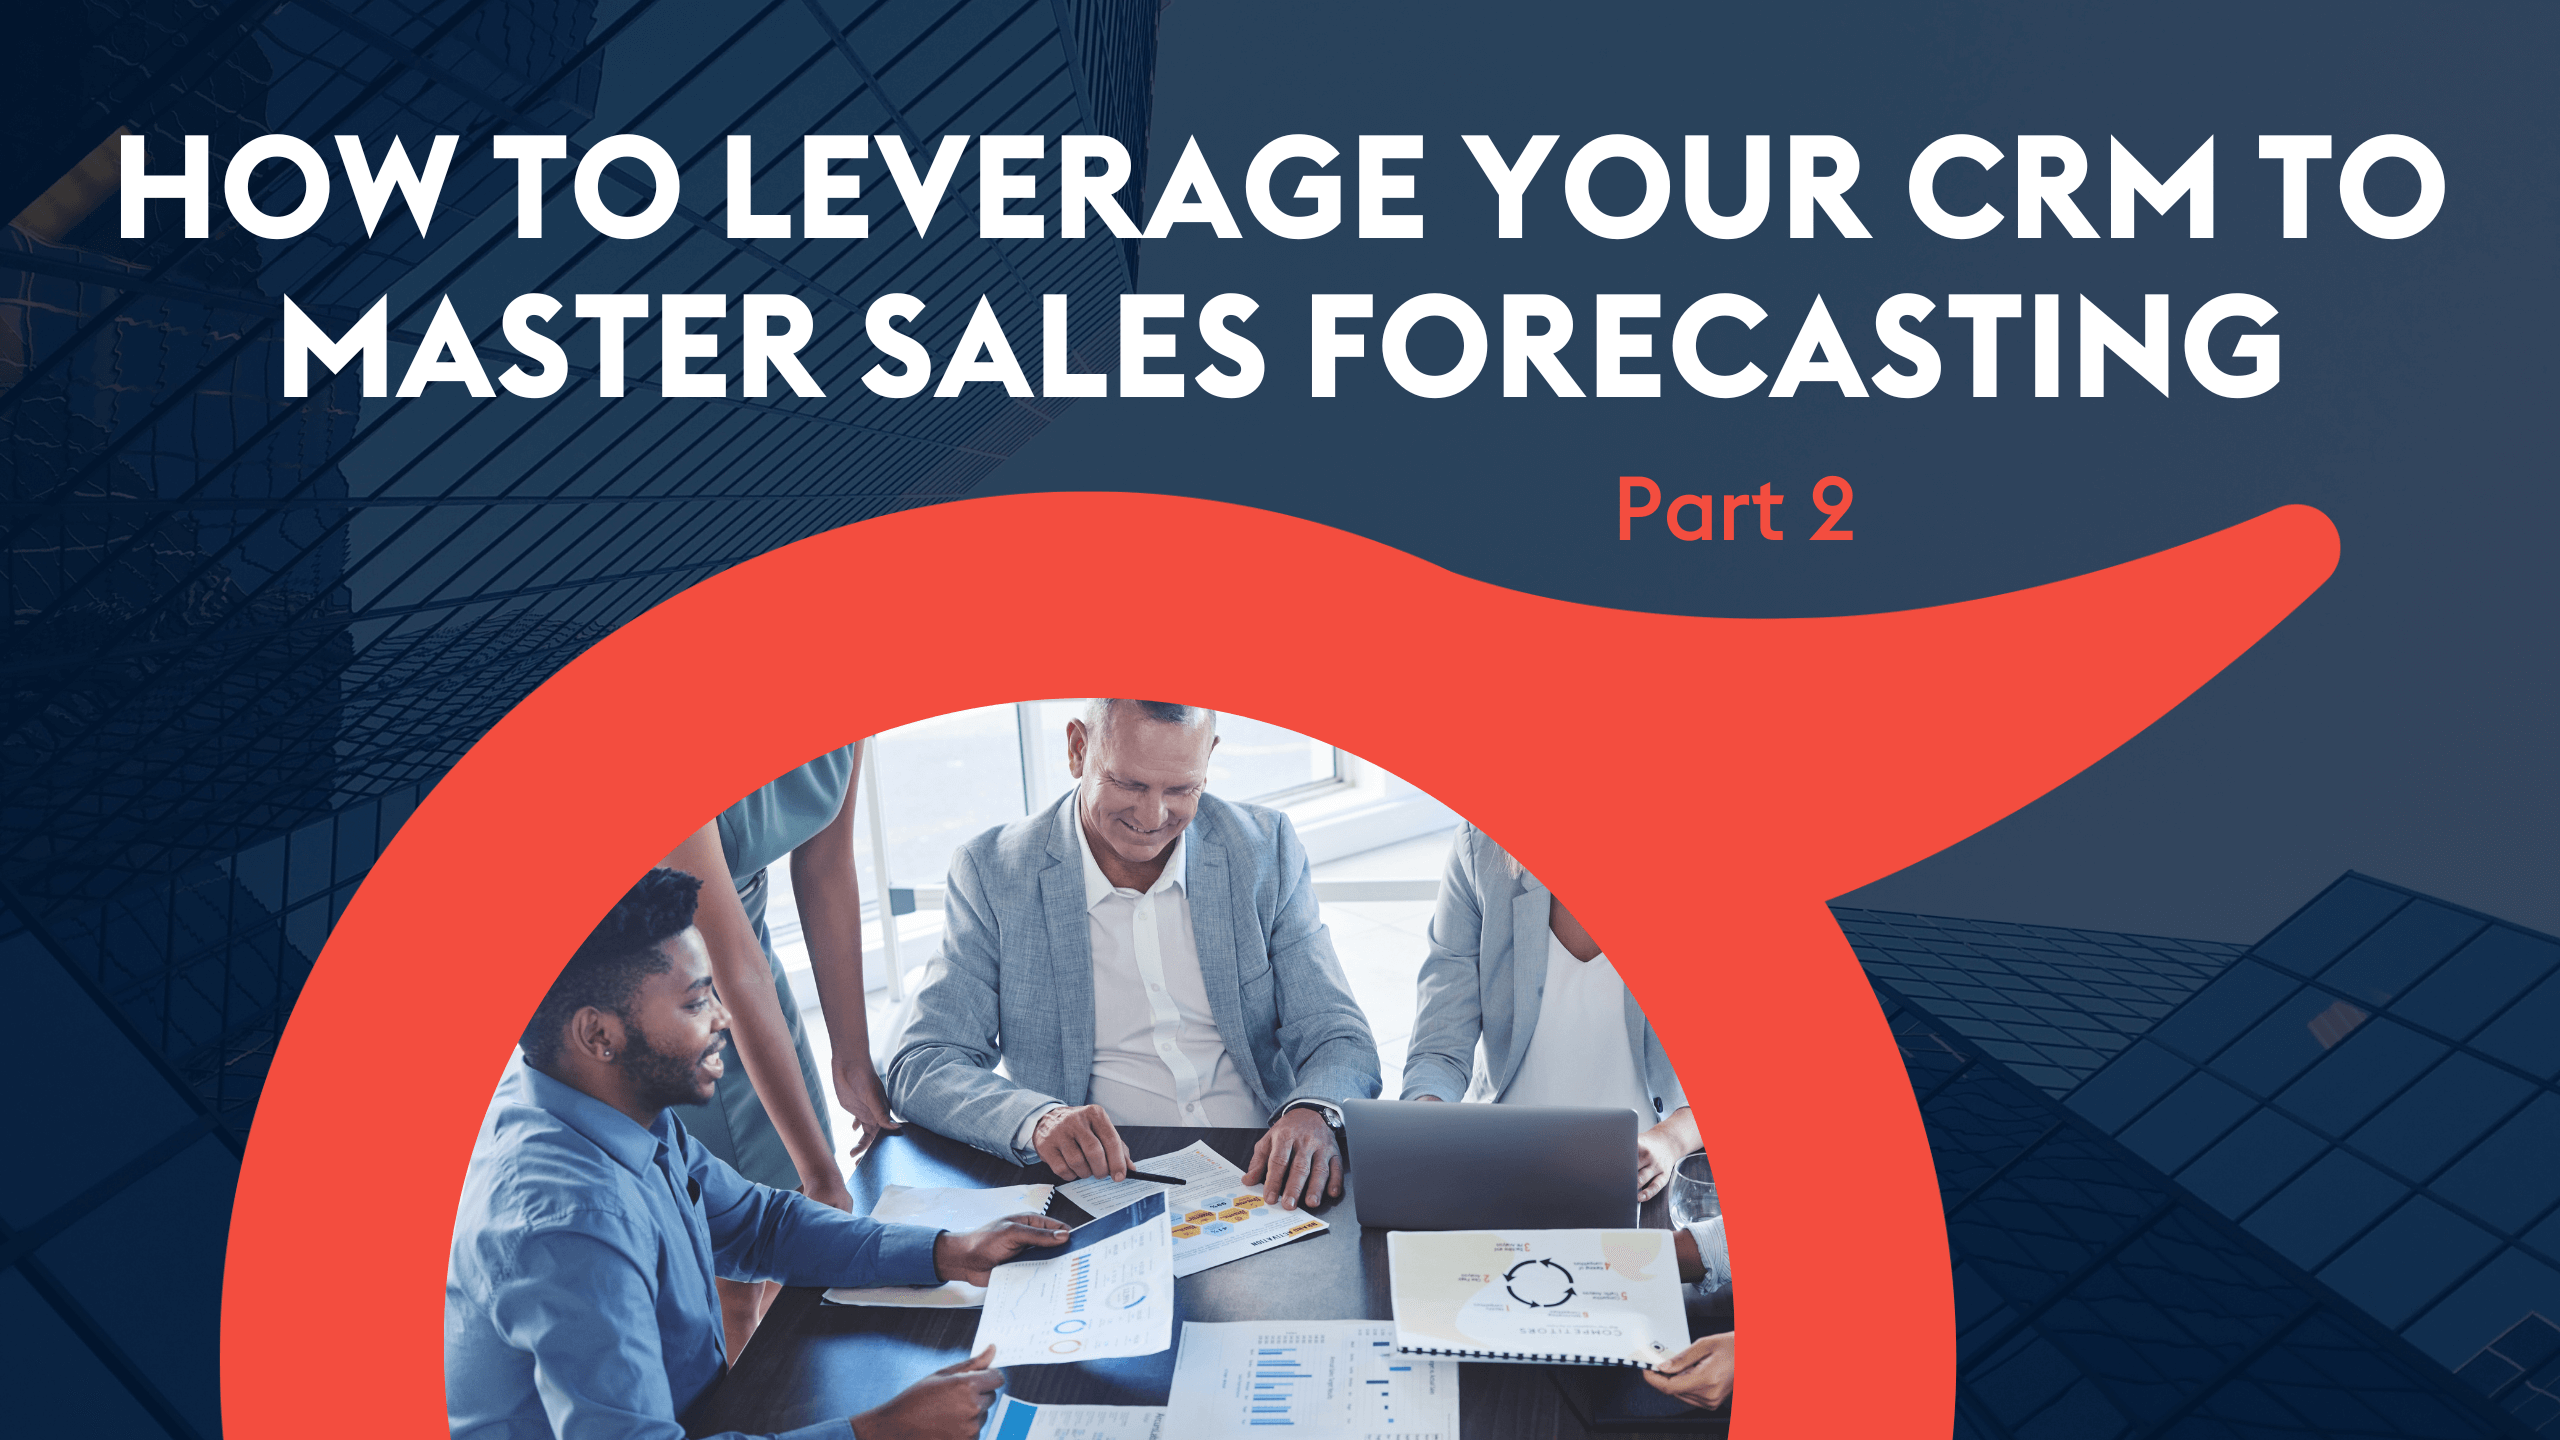 ProvidentCRM-CRM-How-to-Leverage-Your-CRM-Master-Sales-Forecasting-Part-2